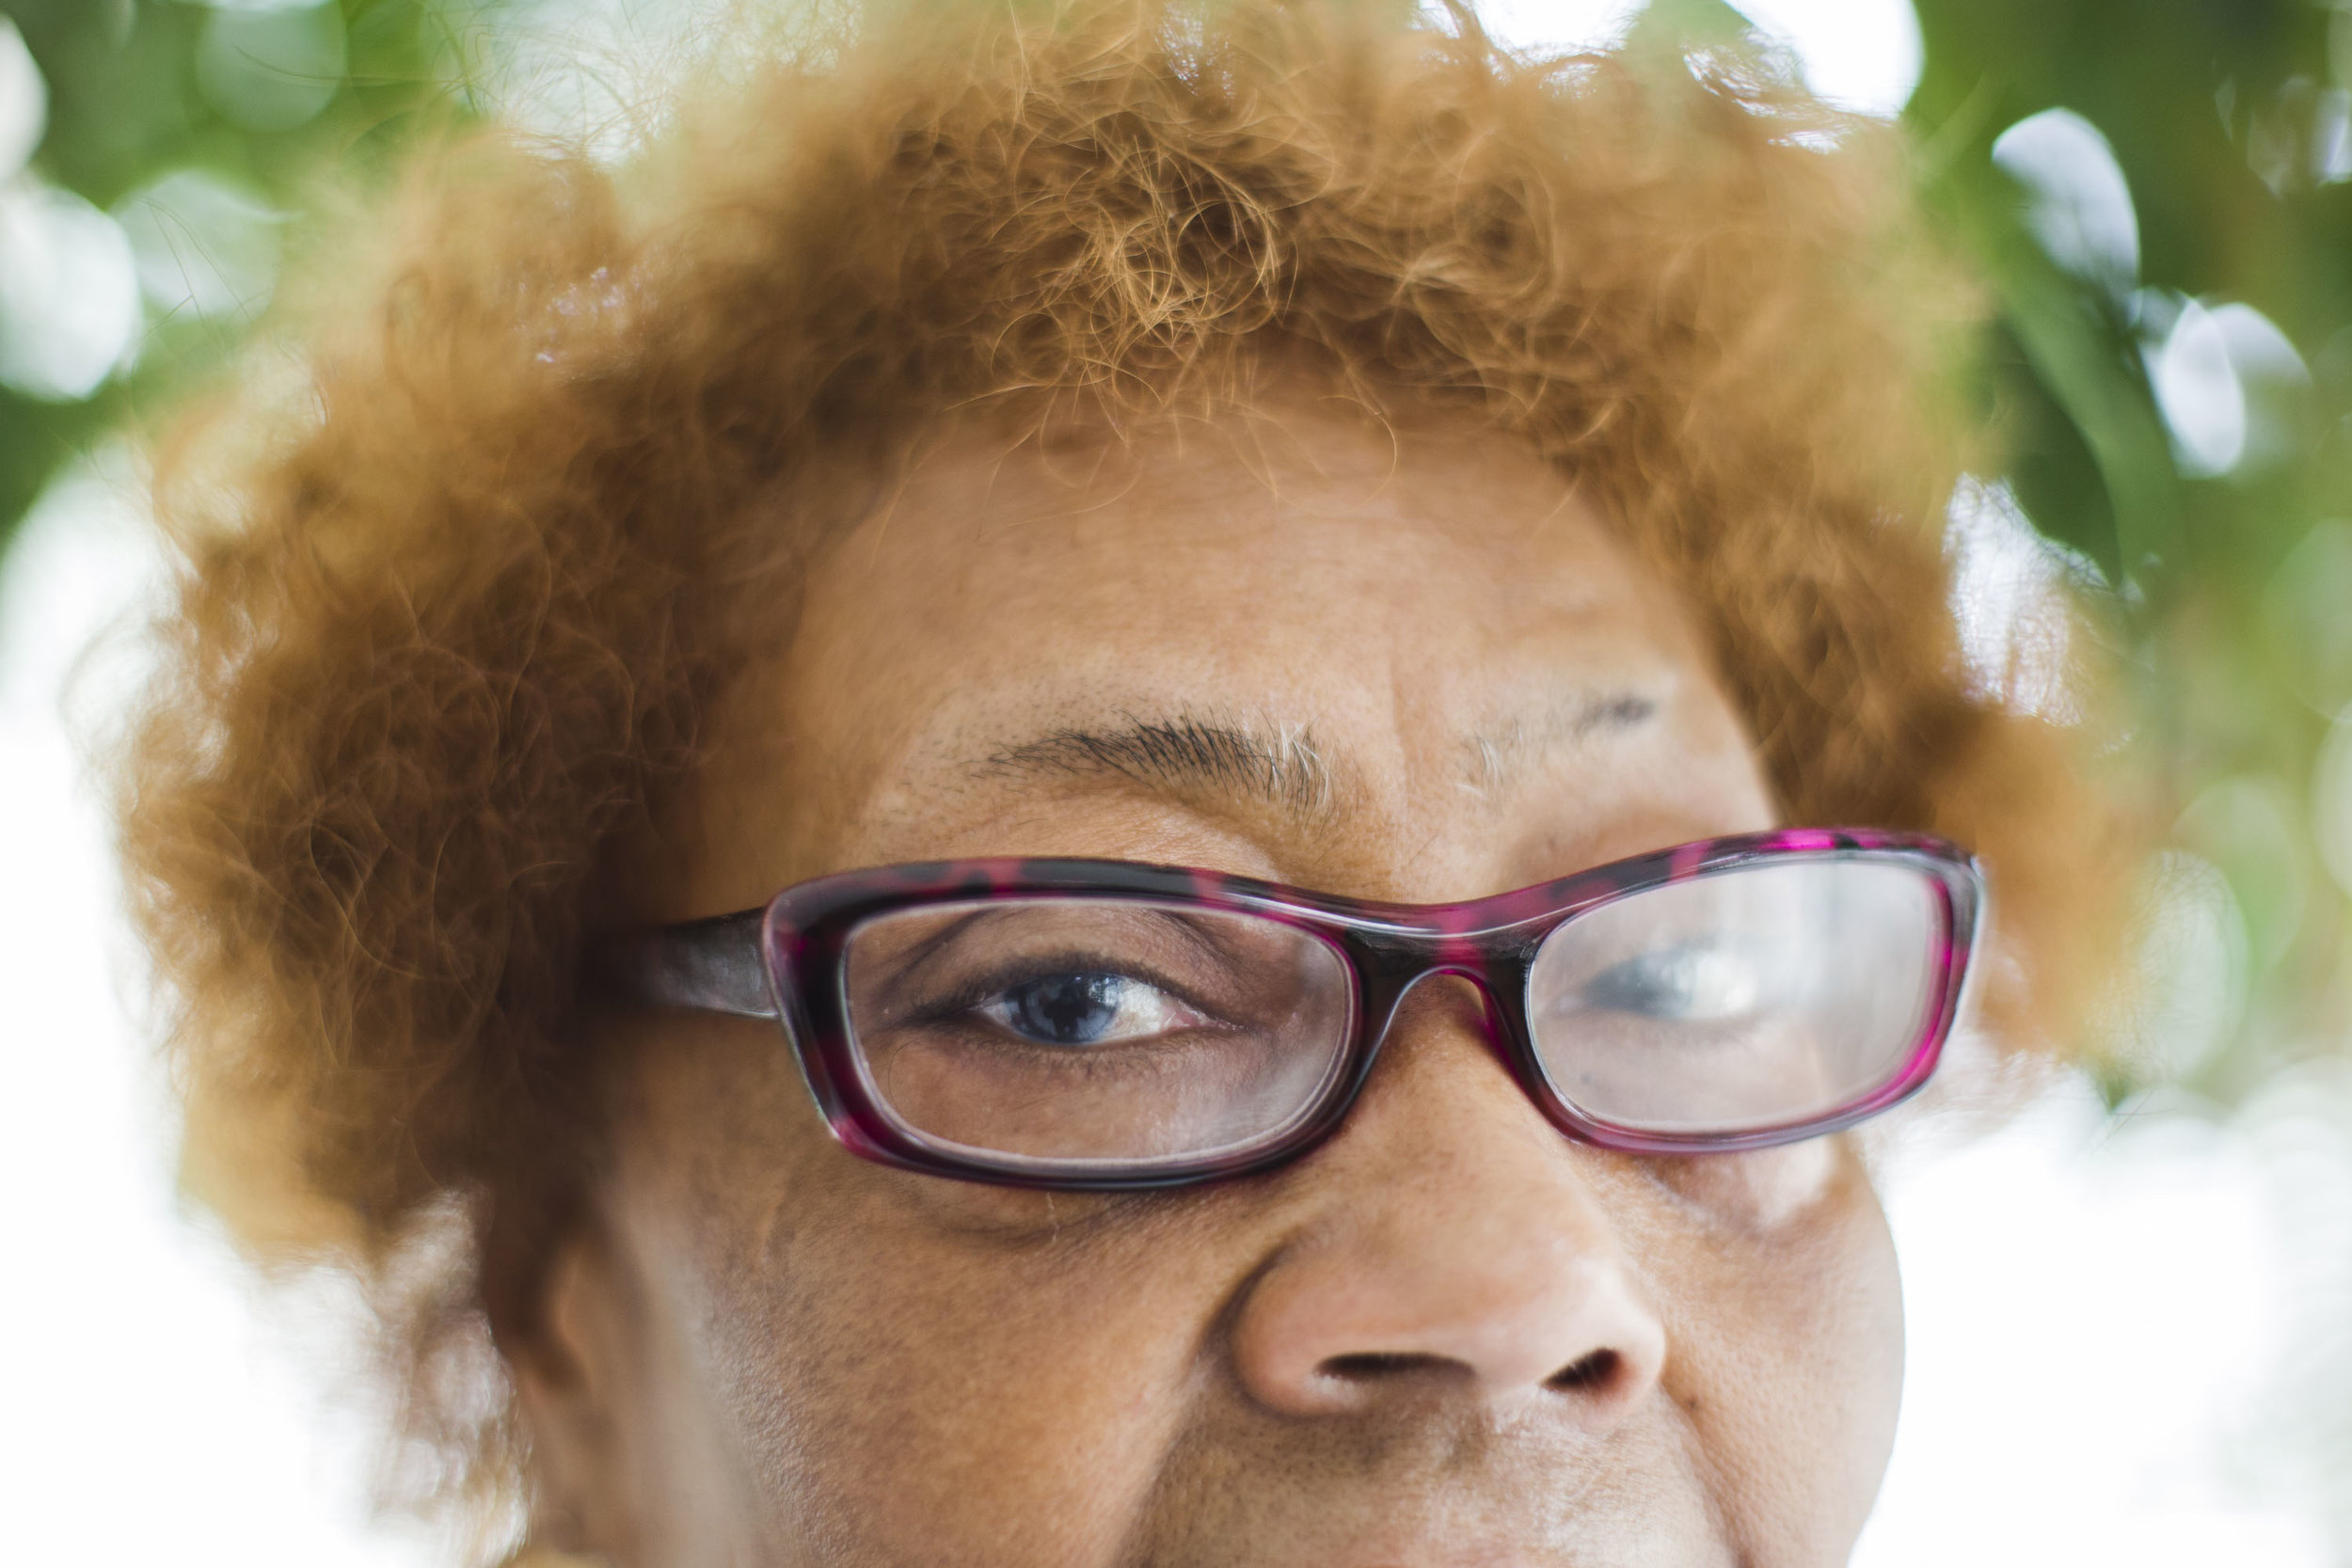  Ruthie Doss, 72, has retinal degeneration and occasionally loses her visions temporarily. Doss enjoys living in a senior building in Washington Park, but she is concerned about the neighborhood. “Even though fast food is not good for us, we should h